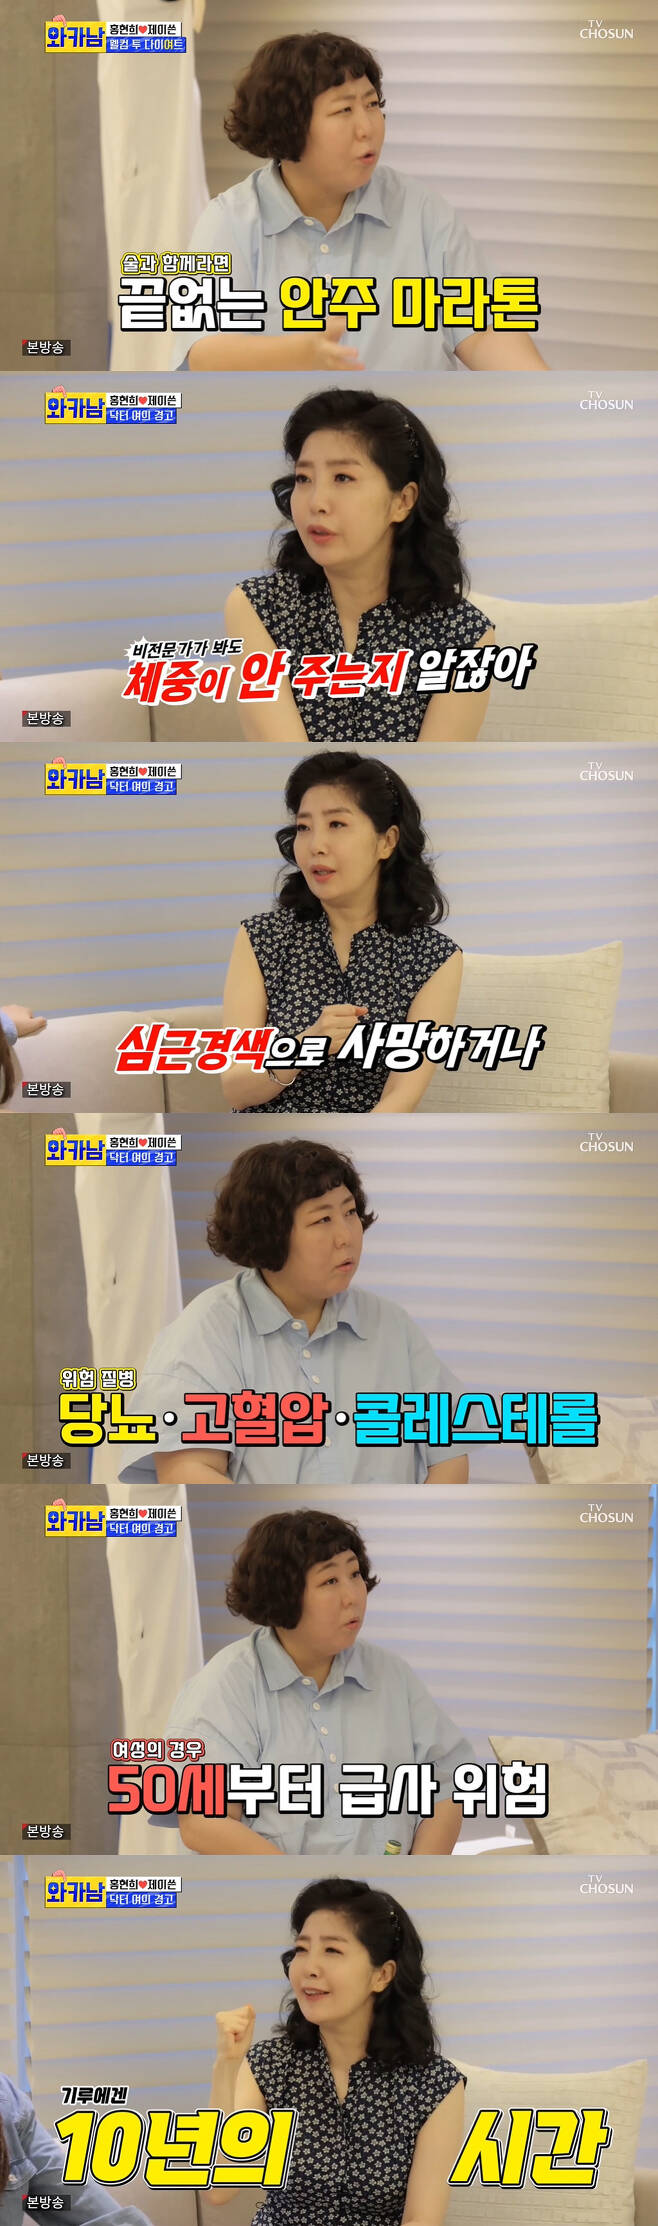 Mirage determined to diet on Yeo Esther warningTV CHOSUN family entertainment The Man Who Writes Wife Cards (hereinafter referred to as Wakanam), which was broadcast on the 24th, was visited by Hong Hyun-hee and Jay-Written couple with Mirage.On this day, Mirage took out water cold noodles, Bibim cold noodles as well as Can Education every time a signal was taken in the car, and made the studio feel like CAR Mukbang.Mirage, who arrived at Guo Guo restaurant, said, I have to eat aroma pork belly. He expressed the food of the amazing Only Meat.Hong Hyun-hee Jay-twin arrived and during the meal, the nervous battle of vegetable Hong Hyun-hee and meat wave Mirage was unfolded.Mirage was surprised by the food such as sauce, sprinkled with mayonnaise on vegetables.In the end, Hong Hyun-hee asked for help from health guard Yeo Esther.When asked about her husbands current situation, Yeo Esther said, Im in a friendly indifference; I hate divorce, I hate separation, but Im annoyed when Im in the same house, so Im in a friendly indifference.At this time, Yeo Esther revealed her husbands leisurely life, and then accused her husband of Why am I angry? About 3 million won, including 970,000 won for camping goods, 550,000 won for camping tarps, and 800,000 won for drones.Mirage then released a daily meal routine: 1 burger a day, rice hangi at lunch, Gimbap and Instant noodles, and night snacks with alcohol.Yeo Esther said: I dont need an expert.I know why I do not lose weight even if I ask a non-expert. If I do not lose weight from now on, I will die from myocardial infarction, die from cerebral infarction, or become a cerebral hemorrhage.However, he said, Men start suddenly at the age of 45, but women are at risk of sudden death from the age of 50. Mr. Giru has still 10 years.Yeo Esther said: Now Mr Giru should not exercise, it is possible he may already be oiled in his cardiovascular system.If you exercise in the heat, you will have serious damage to your blood vessels, he said. There is a risk of hip injuries.It is effective when muscles dissolve fat and exercise, he said.The daily lives of Oh Jong-hyuk and Park Hye-soo were also revealed.On this day, Konyaspor is adopting. Oh Jong-hyuk said, Konyaspor was really pretty. It is good to go to a good place, but it is regrettable.Konyasporis new family said: I raised four of them, two of them organic dogs, I was going to send them to heaven and not raise them, but I watched them on the air and SNS and said, I have to grow them last well.I also named it Bonggu.Shortly afterwards Lee Hong-gi and Anseha found Oh Jong-hyuks house; seven-strong Father Lee Hong-gi couldnt take his eyes off the puppy before the homescape.Thats when Oh Jong-hyuk asked Lee Hong-gi and Anseha for help, quickly turning from construction field sight to cozy terrace.Lee Hong-gi then said, I want to take one, and Oh Jong-hyuk had a good time testing the two people for adoption.Choi Yong-soo opened an eagle football classroom.Choi Yong-soos wife Jeon Yoon-jung and Lee Ha Jung, former baseball player Yoon Seok-mins wife Kim Soo-hyun and Eun-ga Eun visited the eagle soccer classroom.Choi Yong-soo said, I received a call saying, Jun-ho should pay special attention to his sister-in-law. Eun-eun was surprised that Jung Jun-ho is your brother?My wife said, It means you look old, and Lee Ha Jung said, The bishop is young.Then his wife said, I have done my teeth again, and Choi Yong-soo, who was embarrassed, laughed, saying, I still have a lot of mine.The four men conducted a team called FC Dream Tree and Kyonggi, which belonged to Choi Yong-soos son Jae-hyuk, after warm-up with ball control training, pass training, and human ball fight to Choi Yong-soo.Then, the full-scale soccer Kyonggi time.Choi Yong-soo, who finished the first half, said, No matter what I do, our players can not do anything. He suggested to FC Dream Tree, Lets not do it.Nevertheless, the score was 5-0. Especially, his son Jae-hyuk scored a goal and laughed in front of Father.Choi Yong-soo told the weary FC Wakanam, I cant go home if I dont score one goal, and at this point Choi Yong-soos wife scored dramatically and finished Kyonggi 5-1.